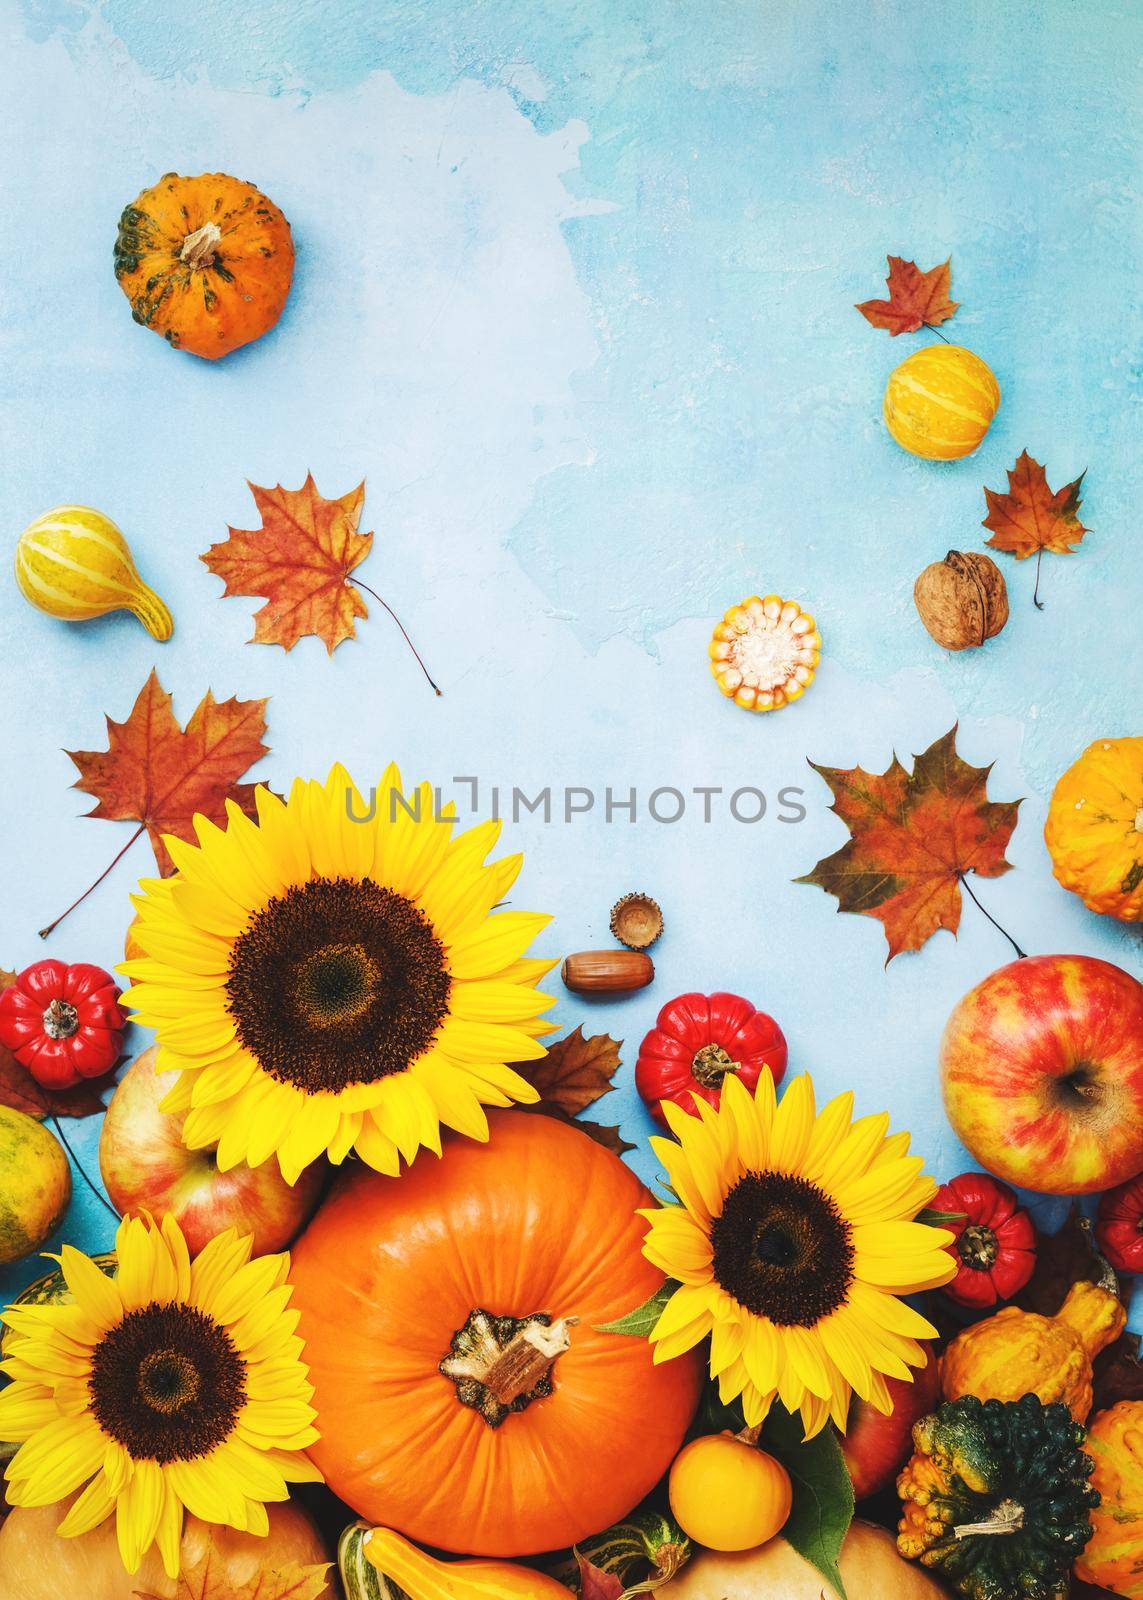 Fall fruits and vegetables with golden sunflowers. Still life composition, can be used for Thanksgiving concepts,  Halloween or  autumn  harvest.Top view, blank space, rustic background by Slast20